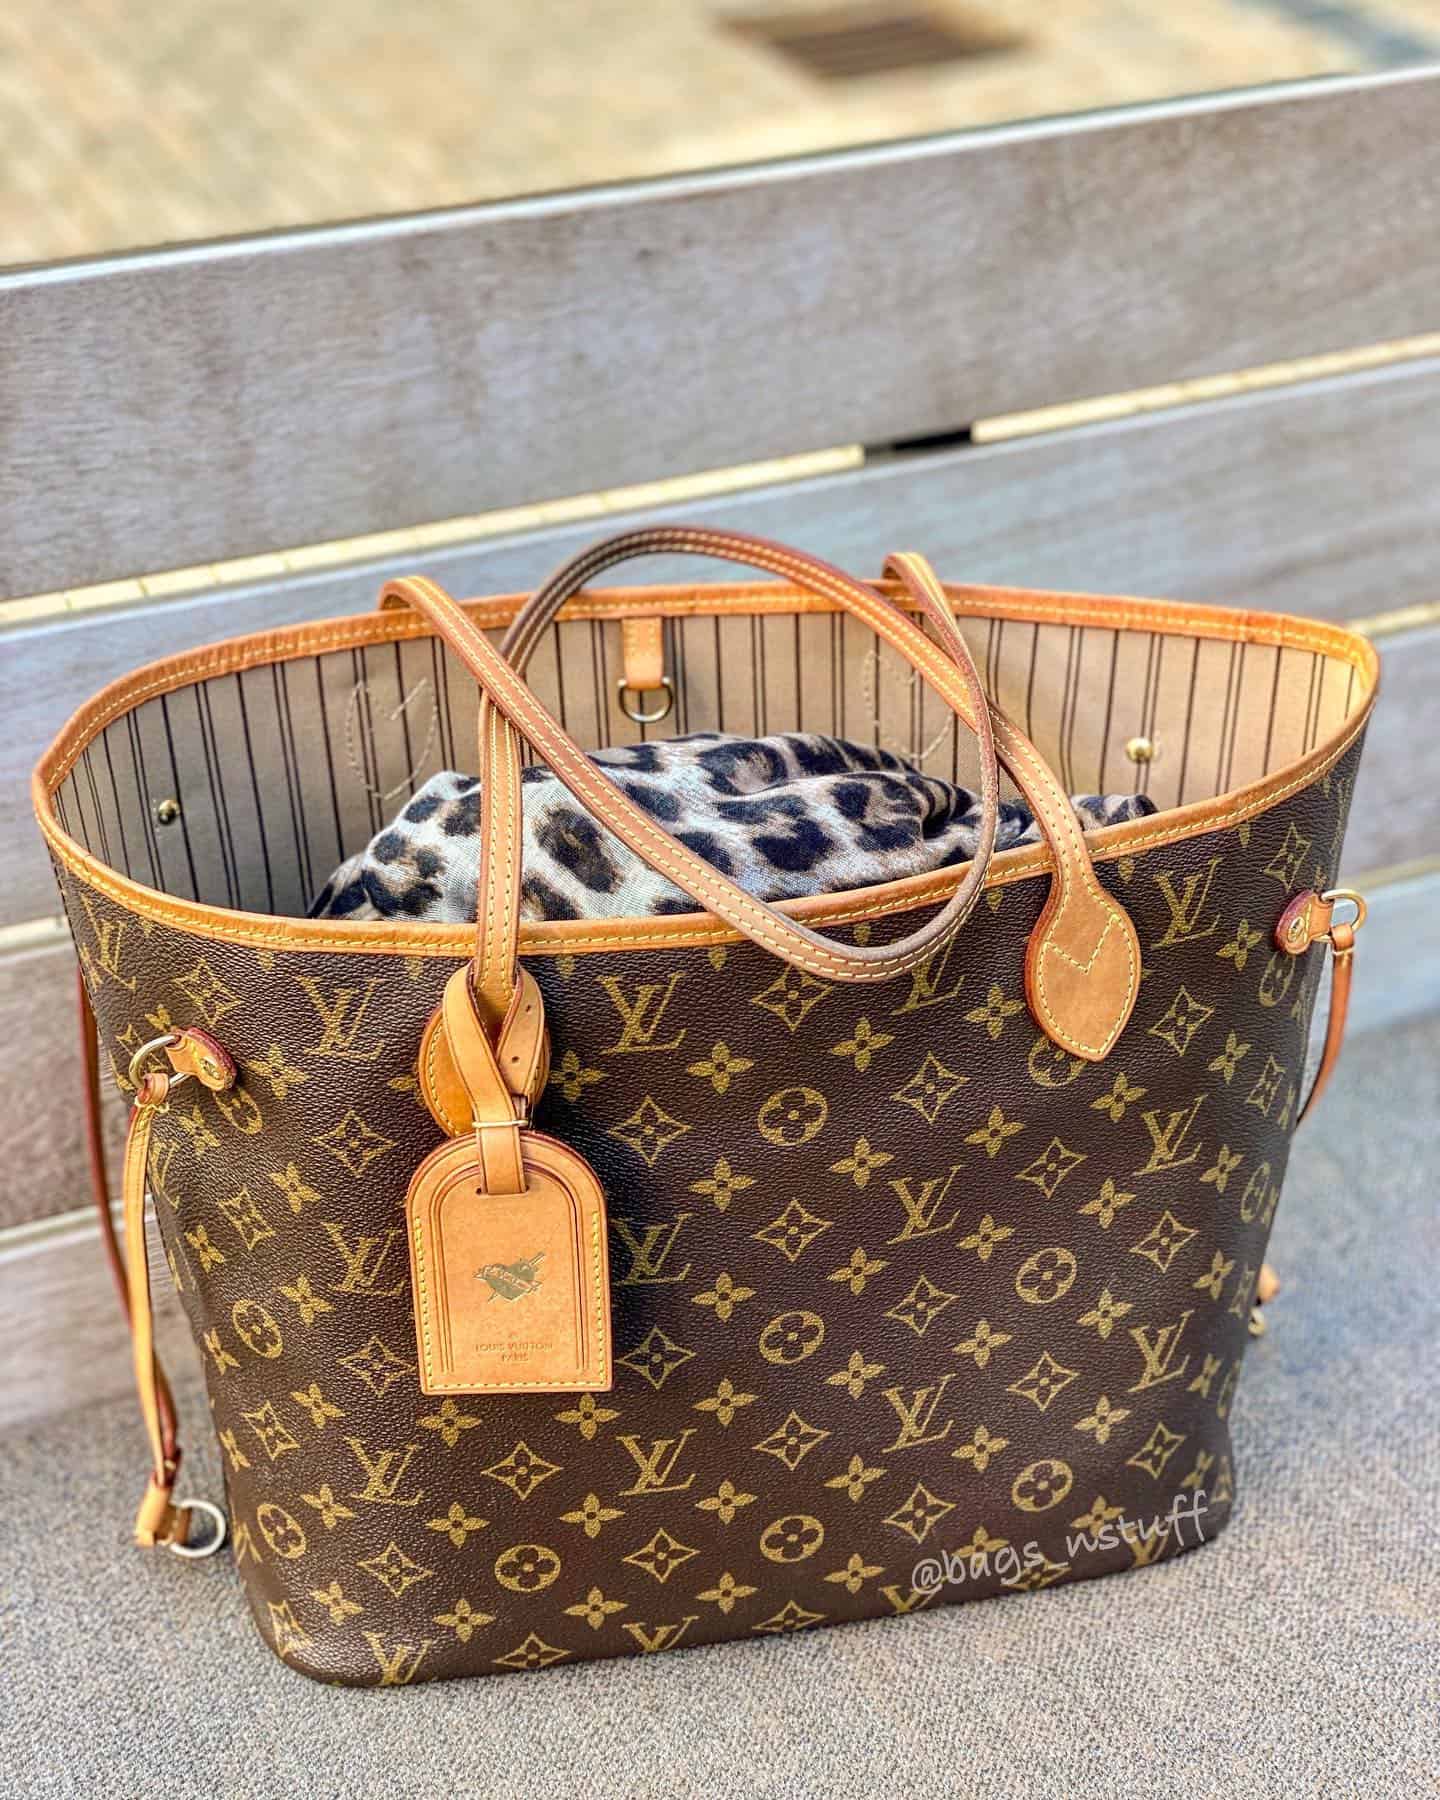 What fits inside a LV Neverfull bag